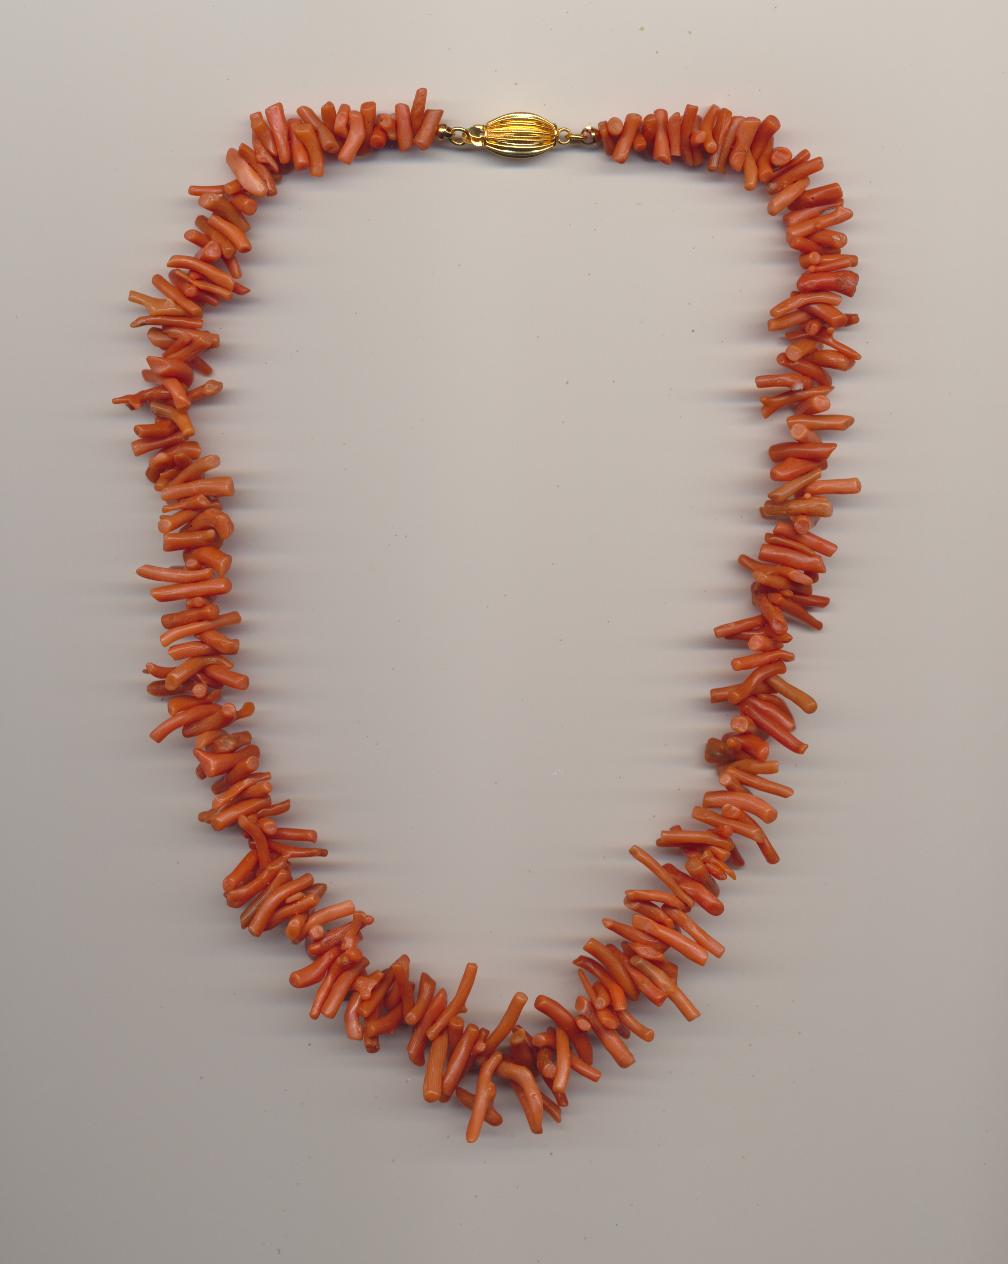 https://www.choosing-bead-necklaces.com/images/imitations/3_necklace%20coral%20branch%2046cm.jpg